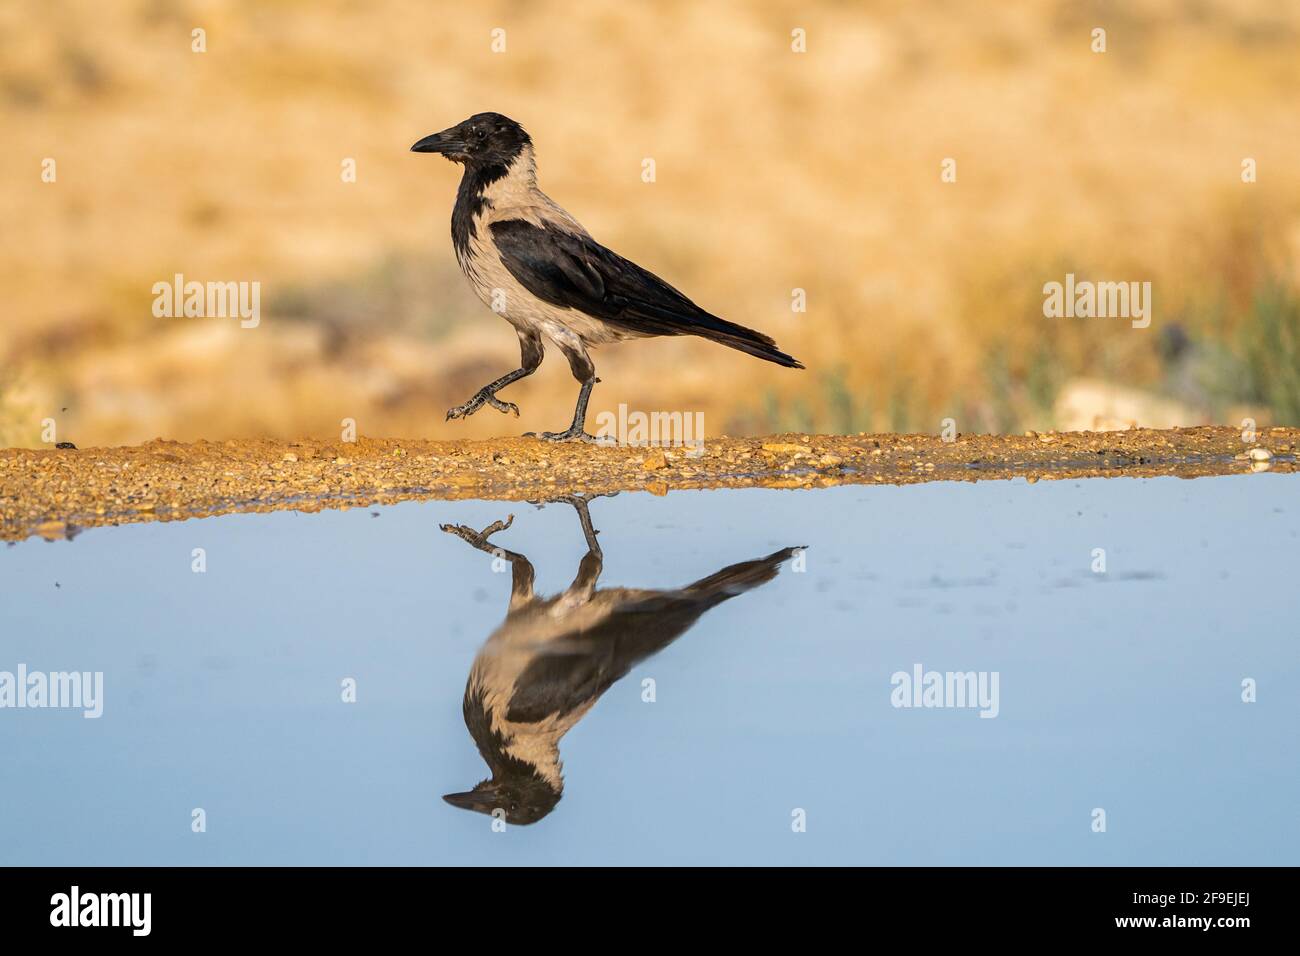 Hooded crow (Corvus cornix) near water The hooded crow is a widespread bird found throughout much of Europe and the Middle East. It is an omnivorous s Stock Photo